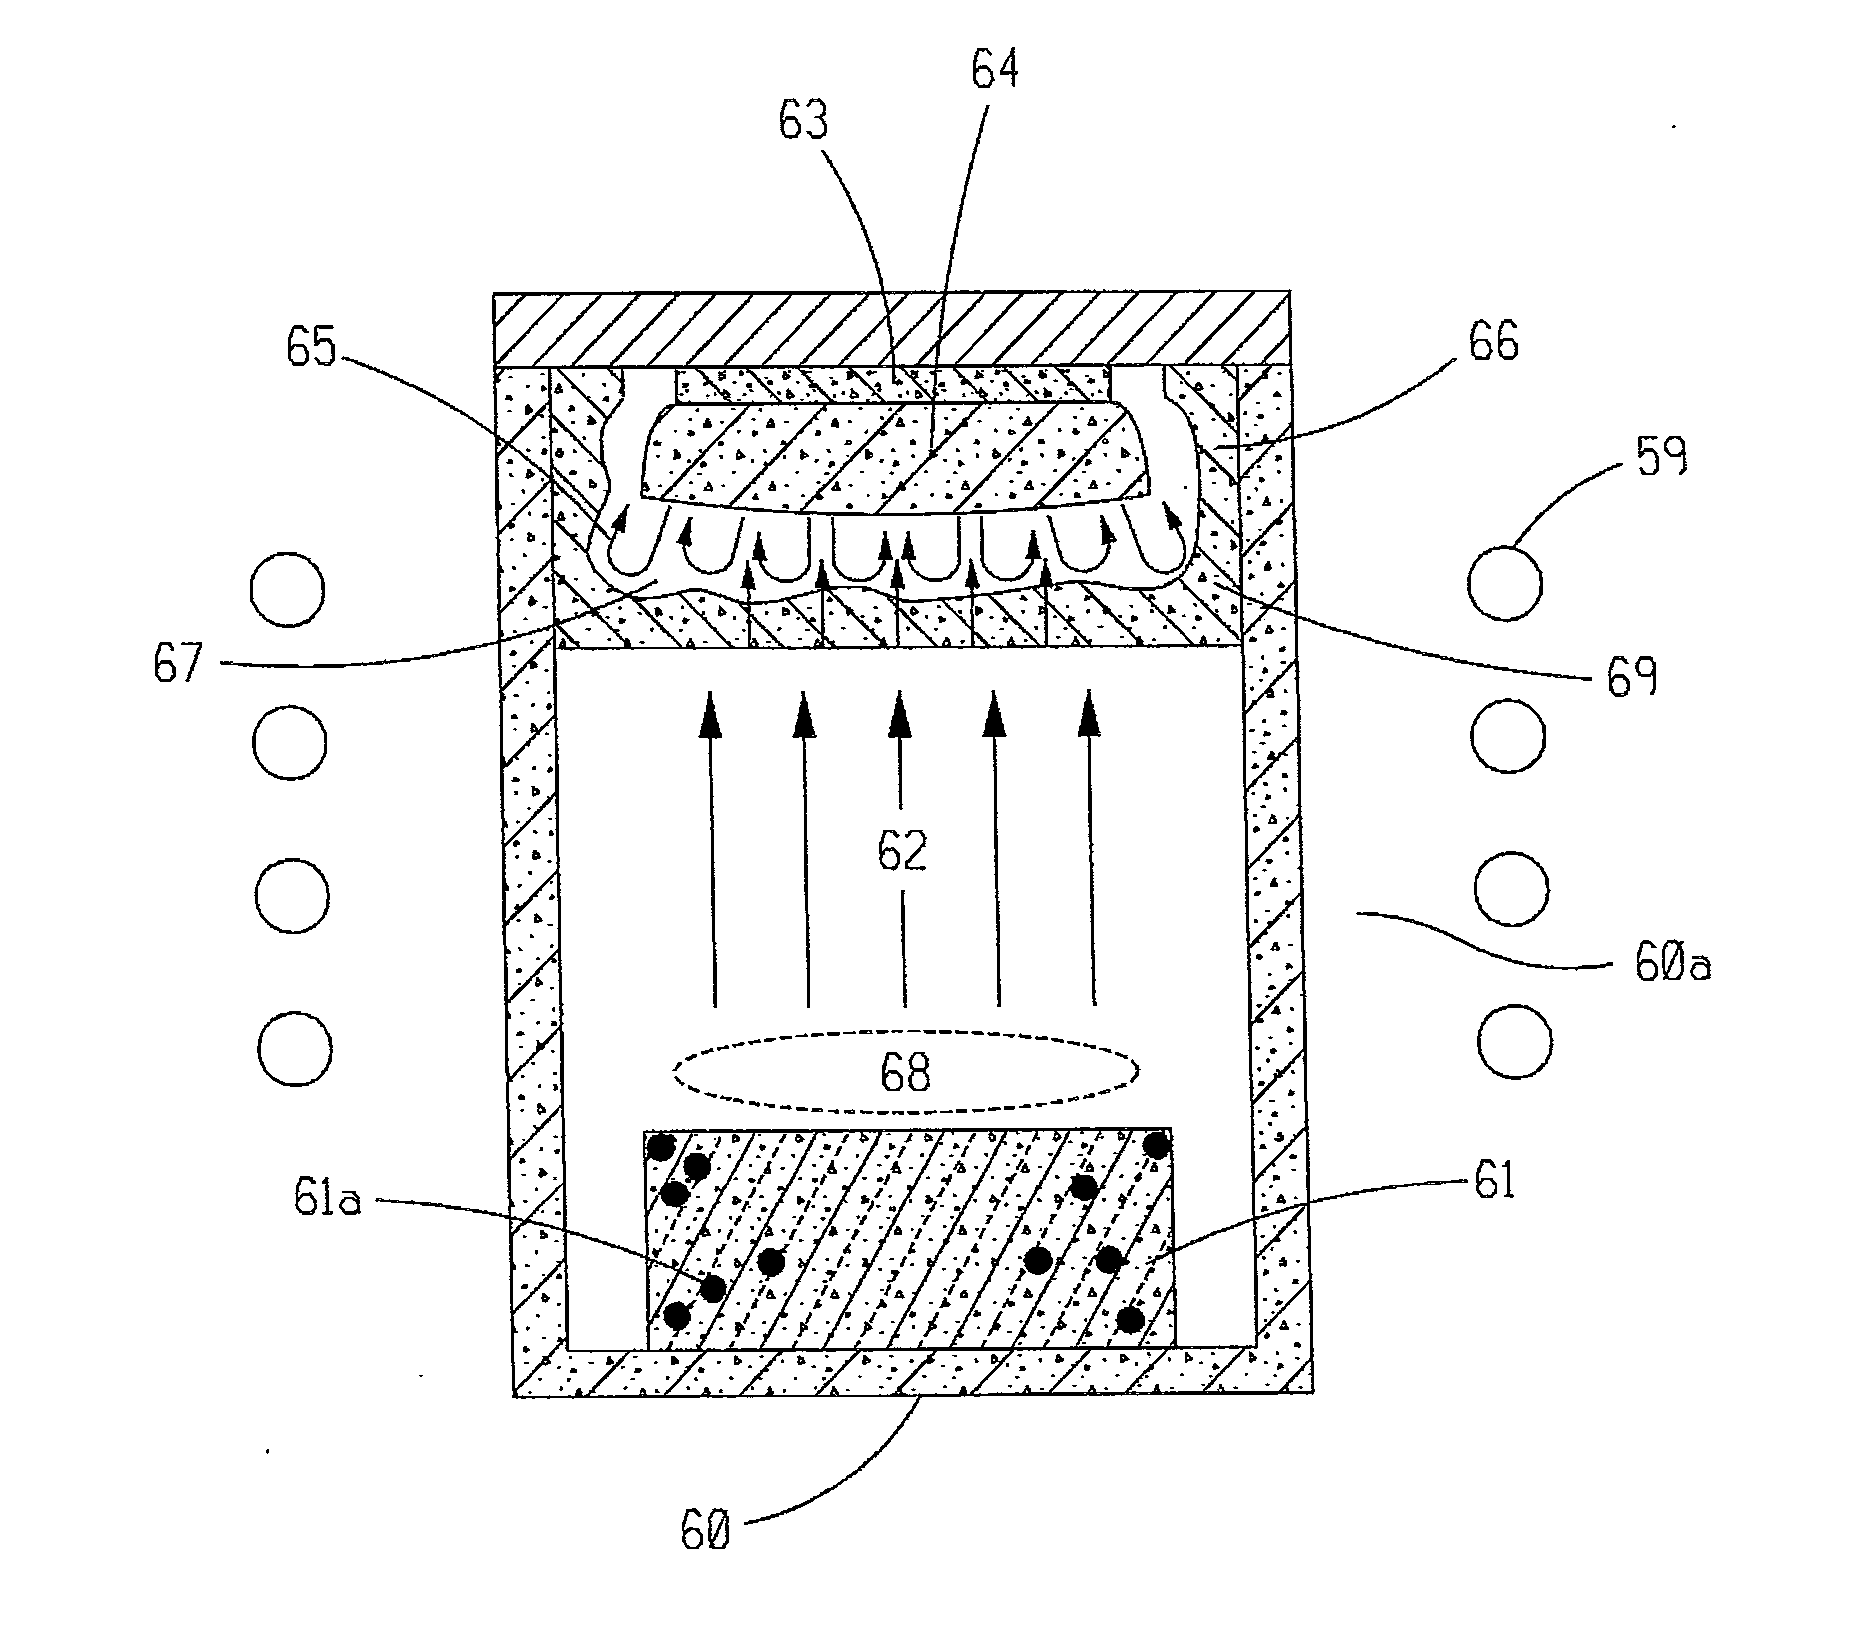 Sic single crystal sublimation growth method and apparatus